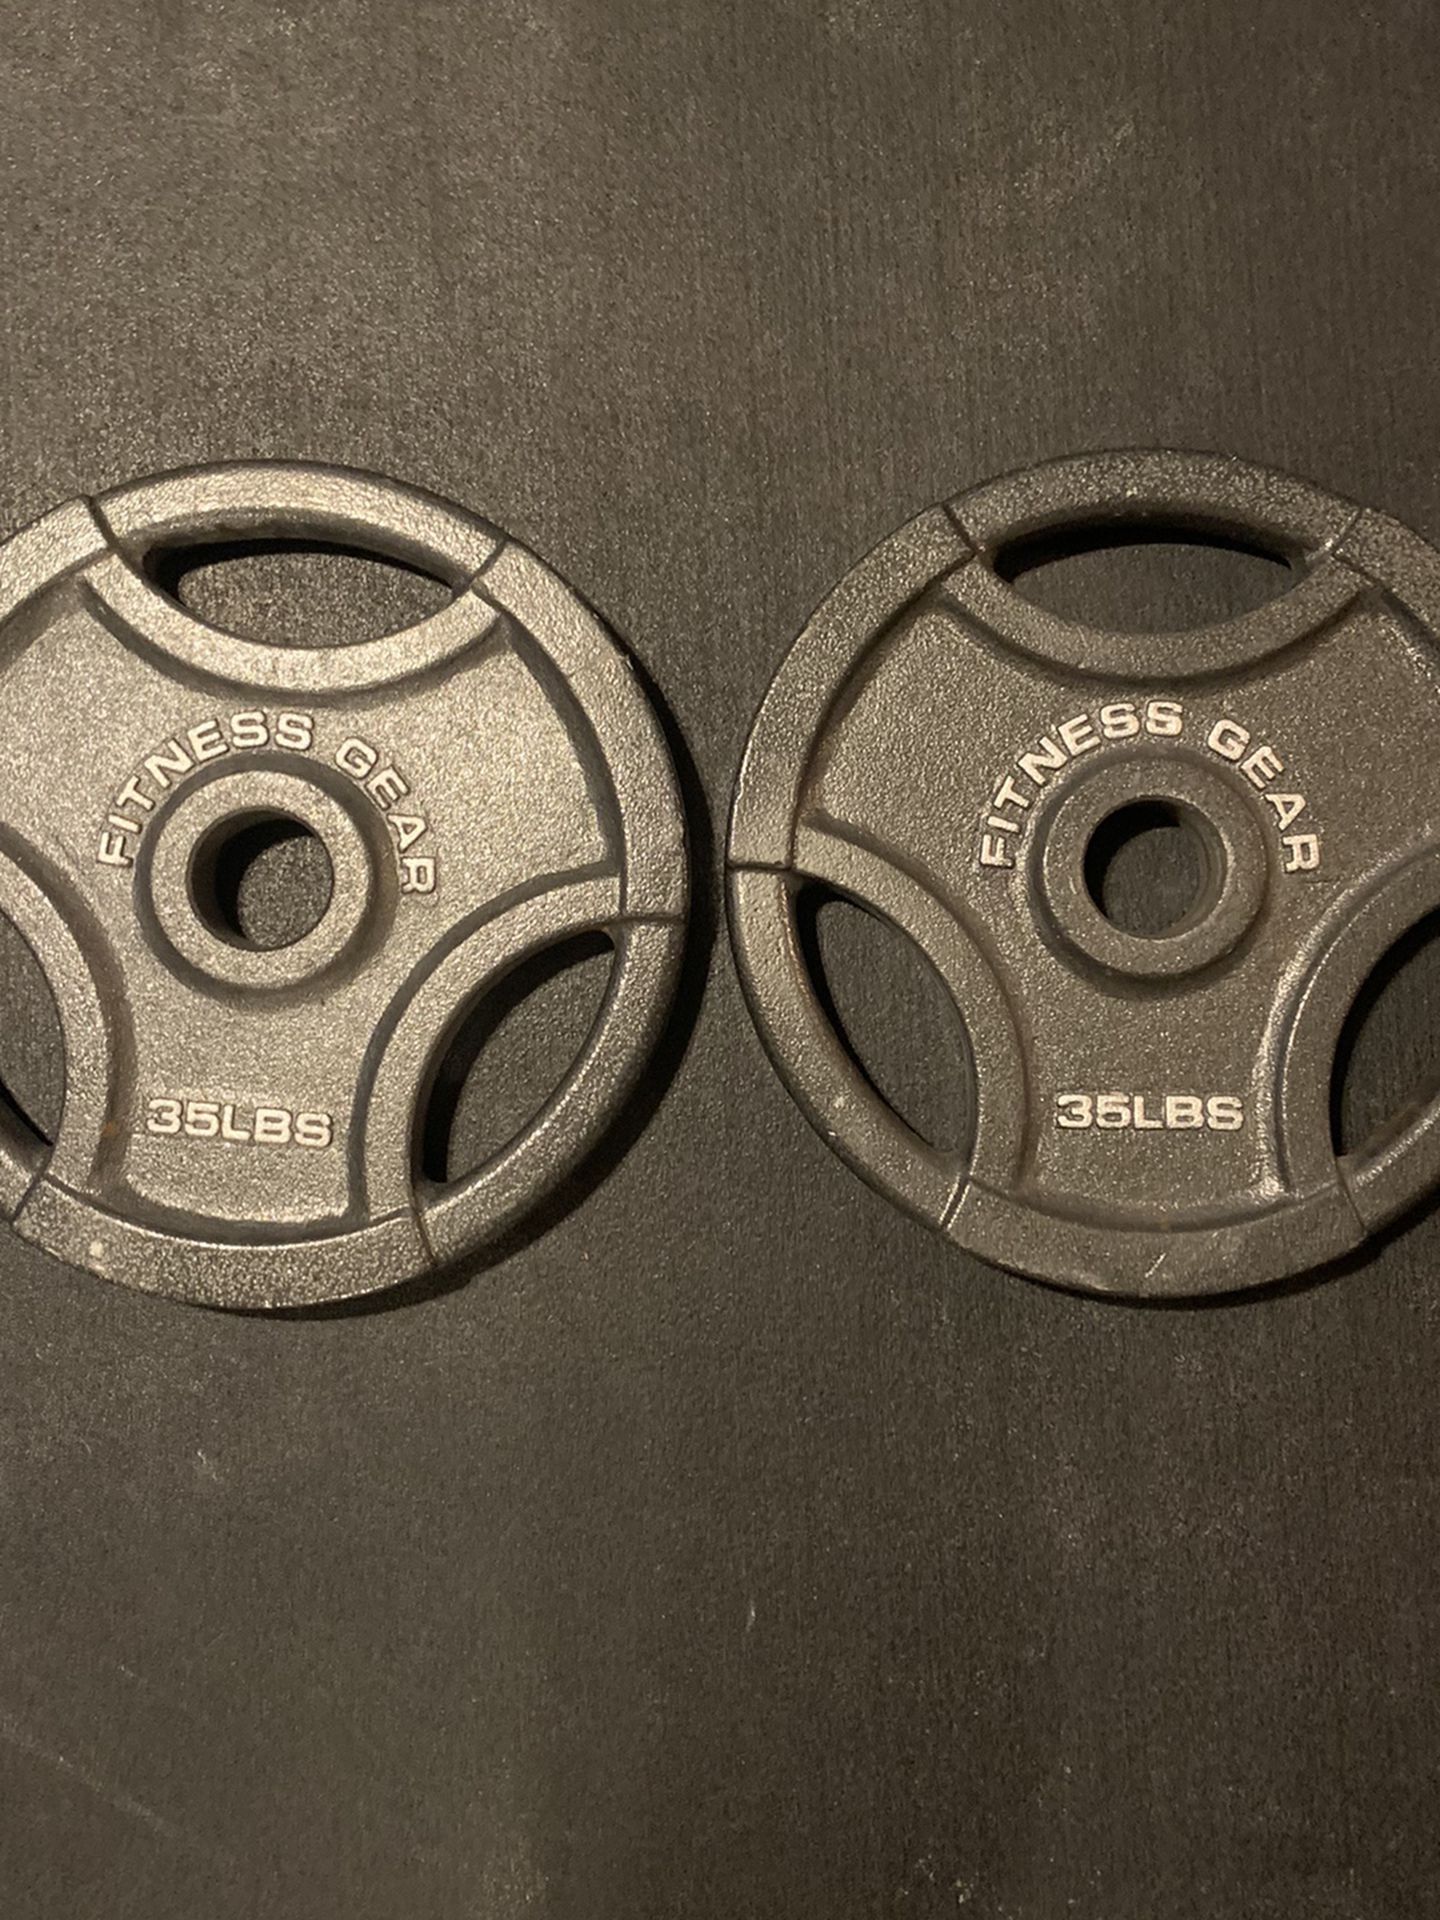 Olympic Weights 35 Lb Pair